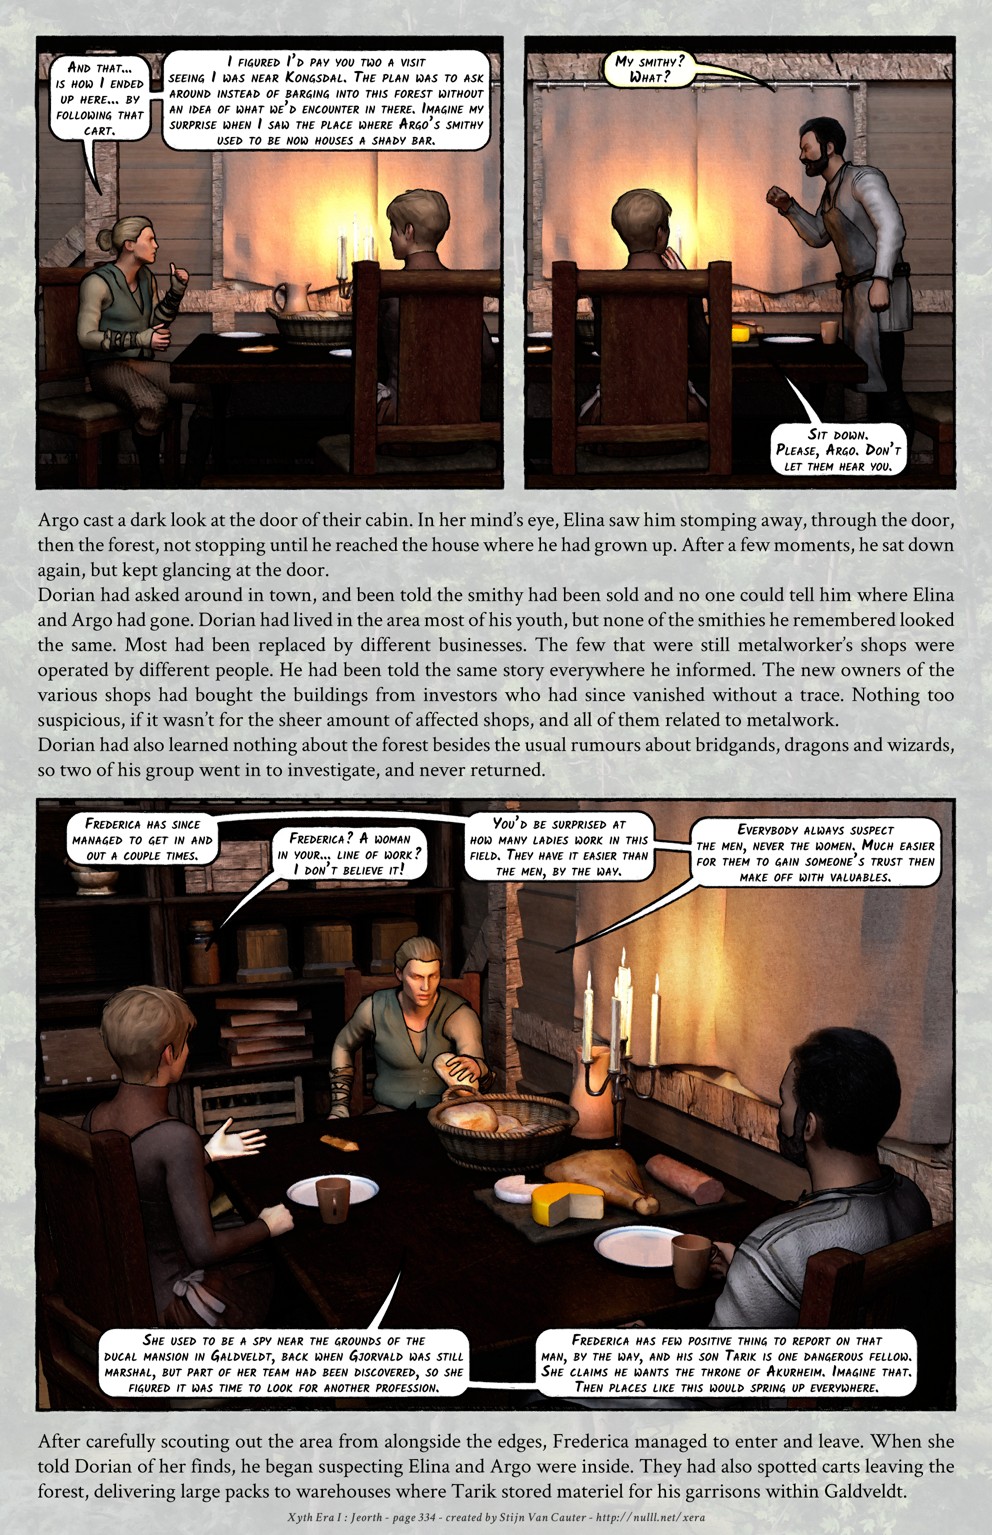 page 4/6